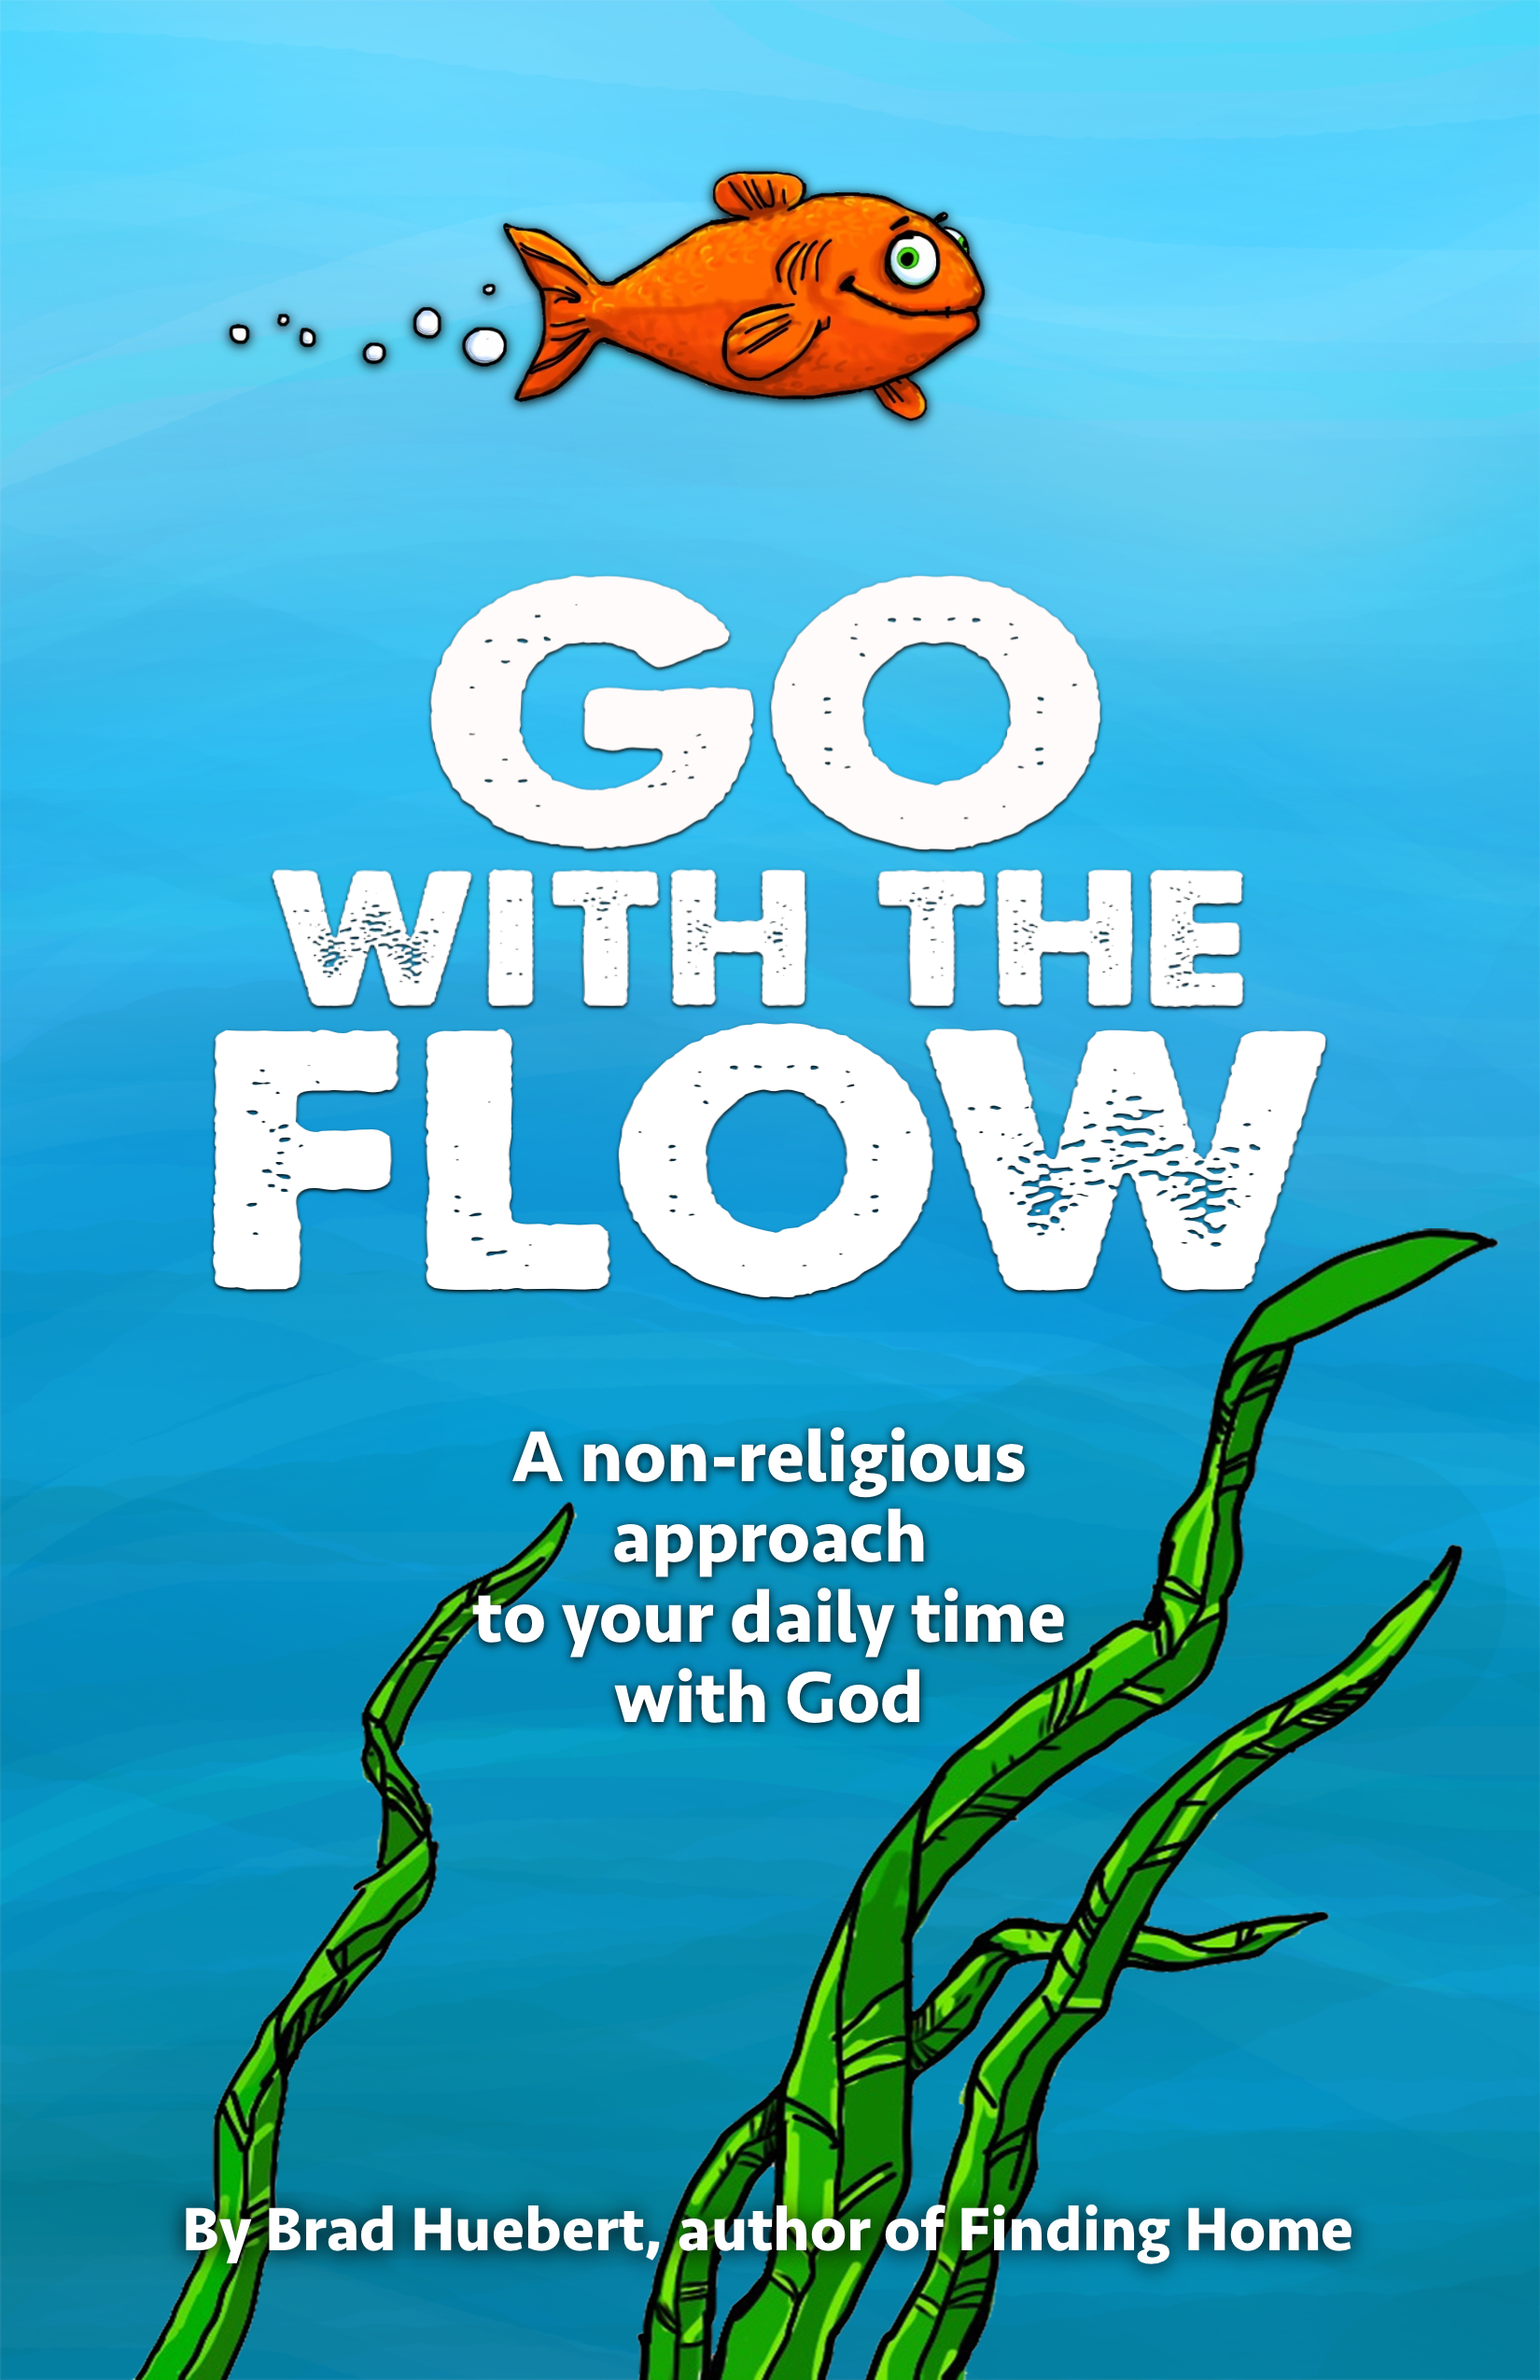 go-with-the-flow